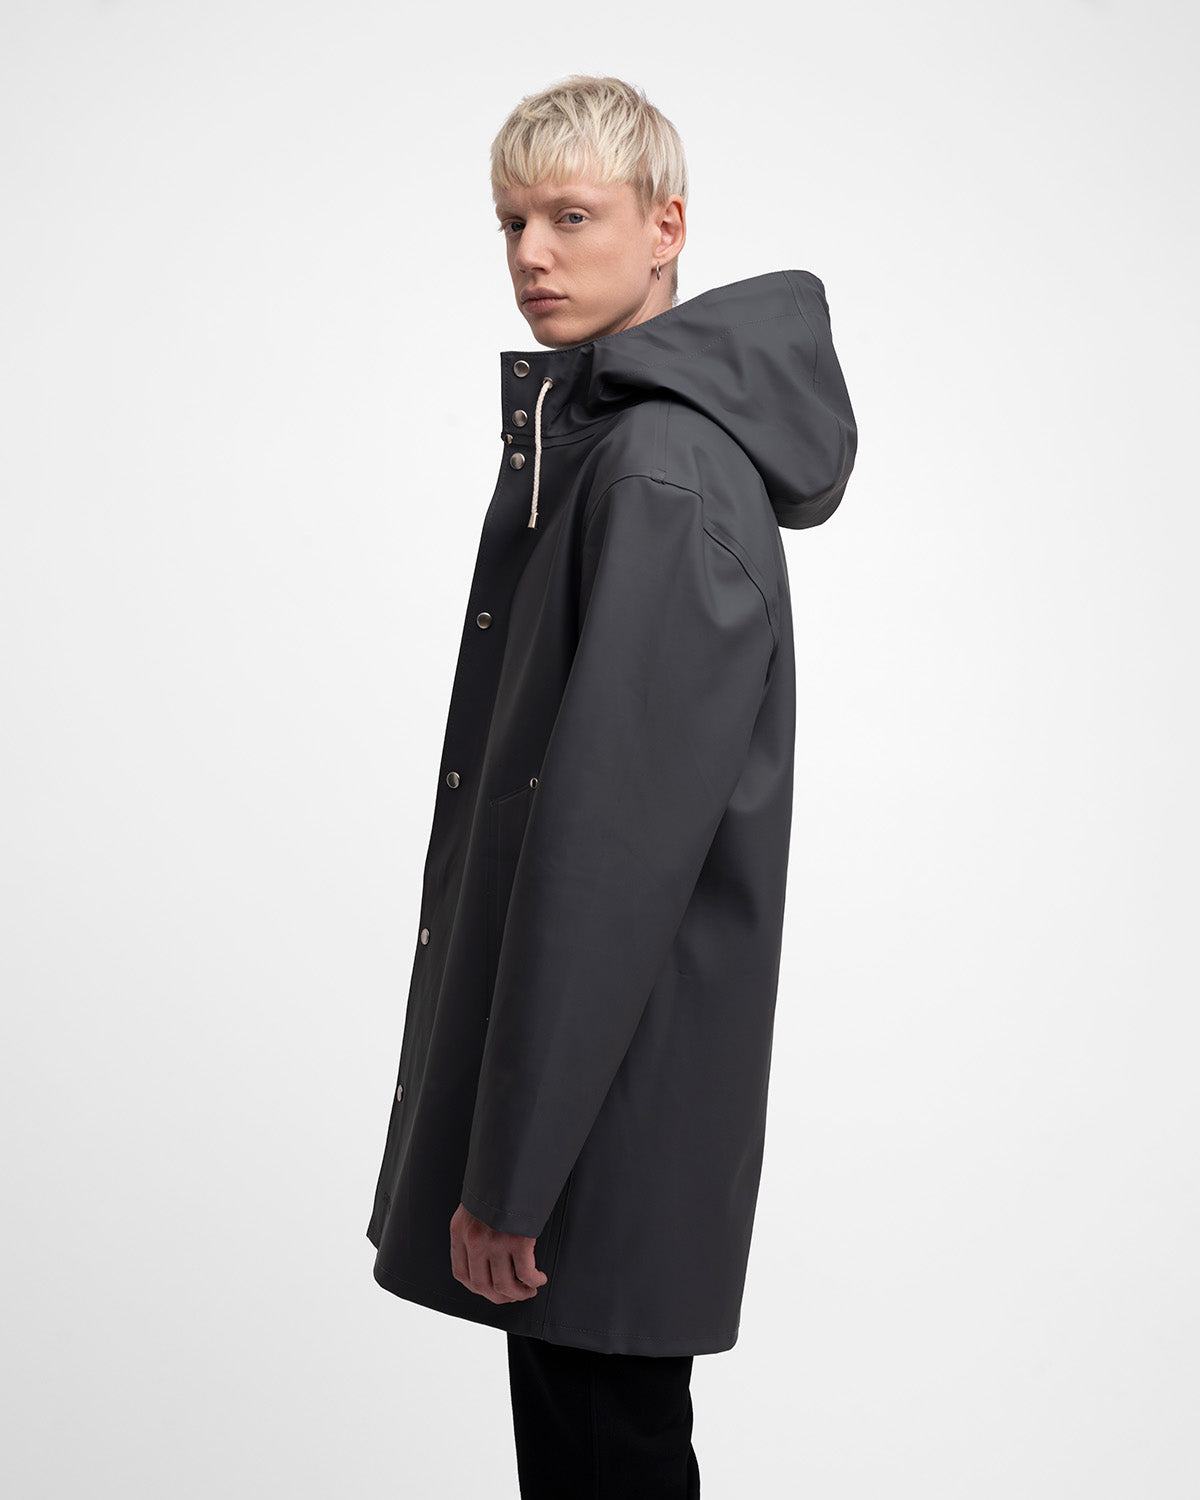 A man with a Raincoat in color charcoal by Stutterheim